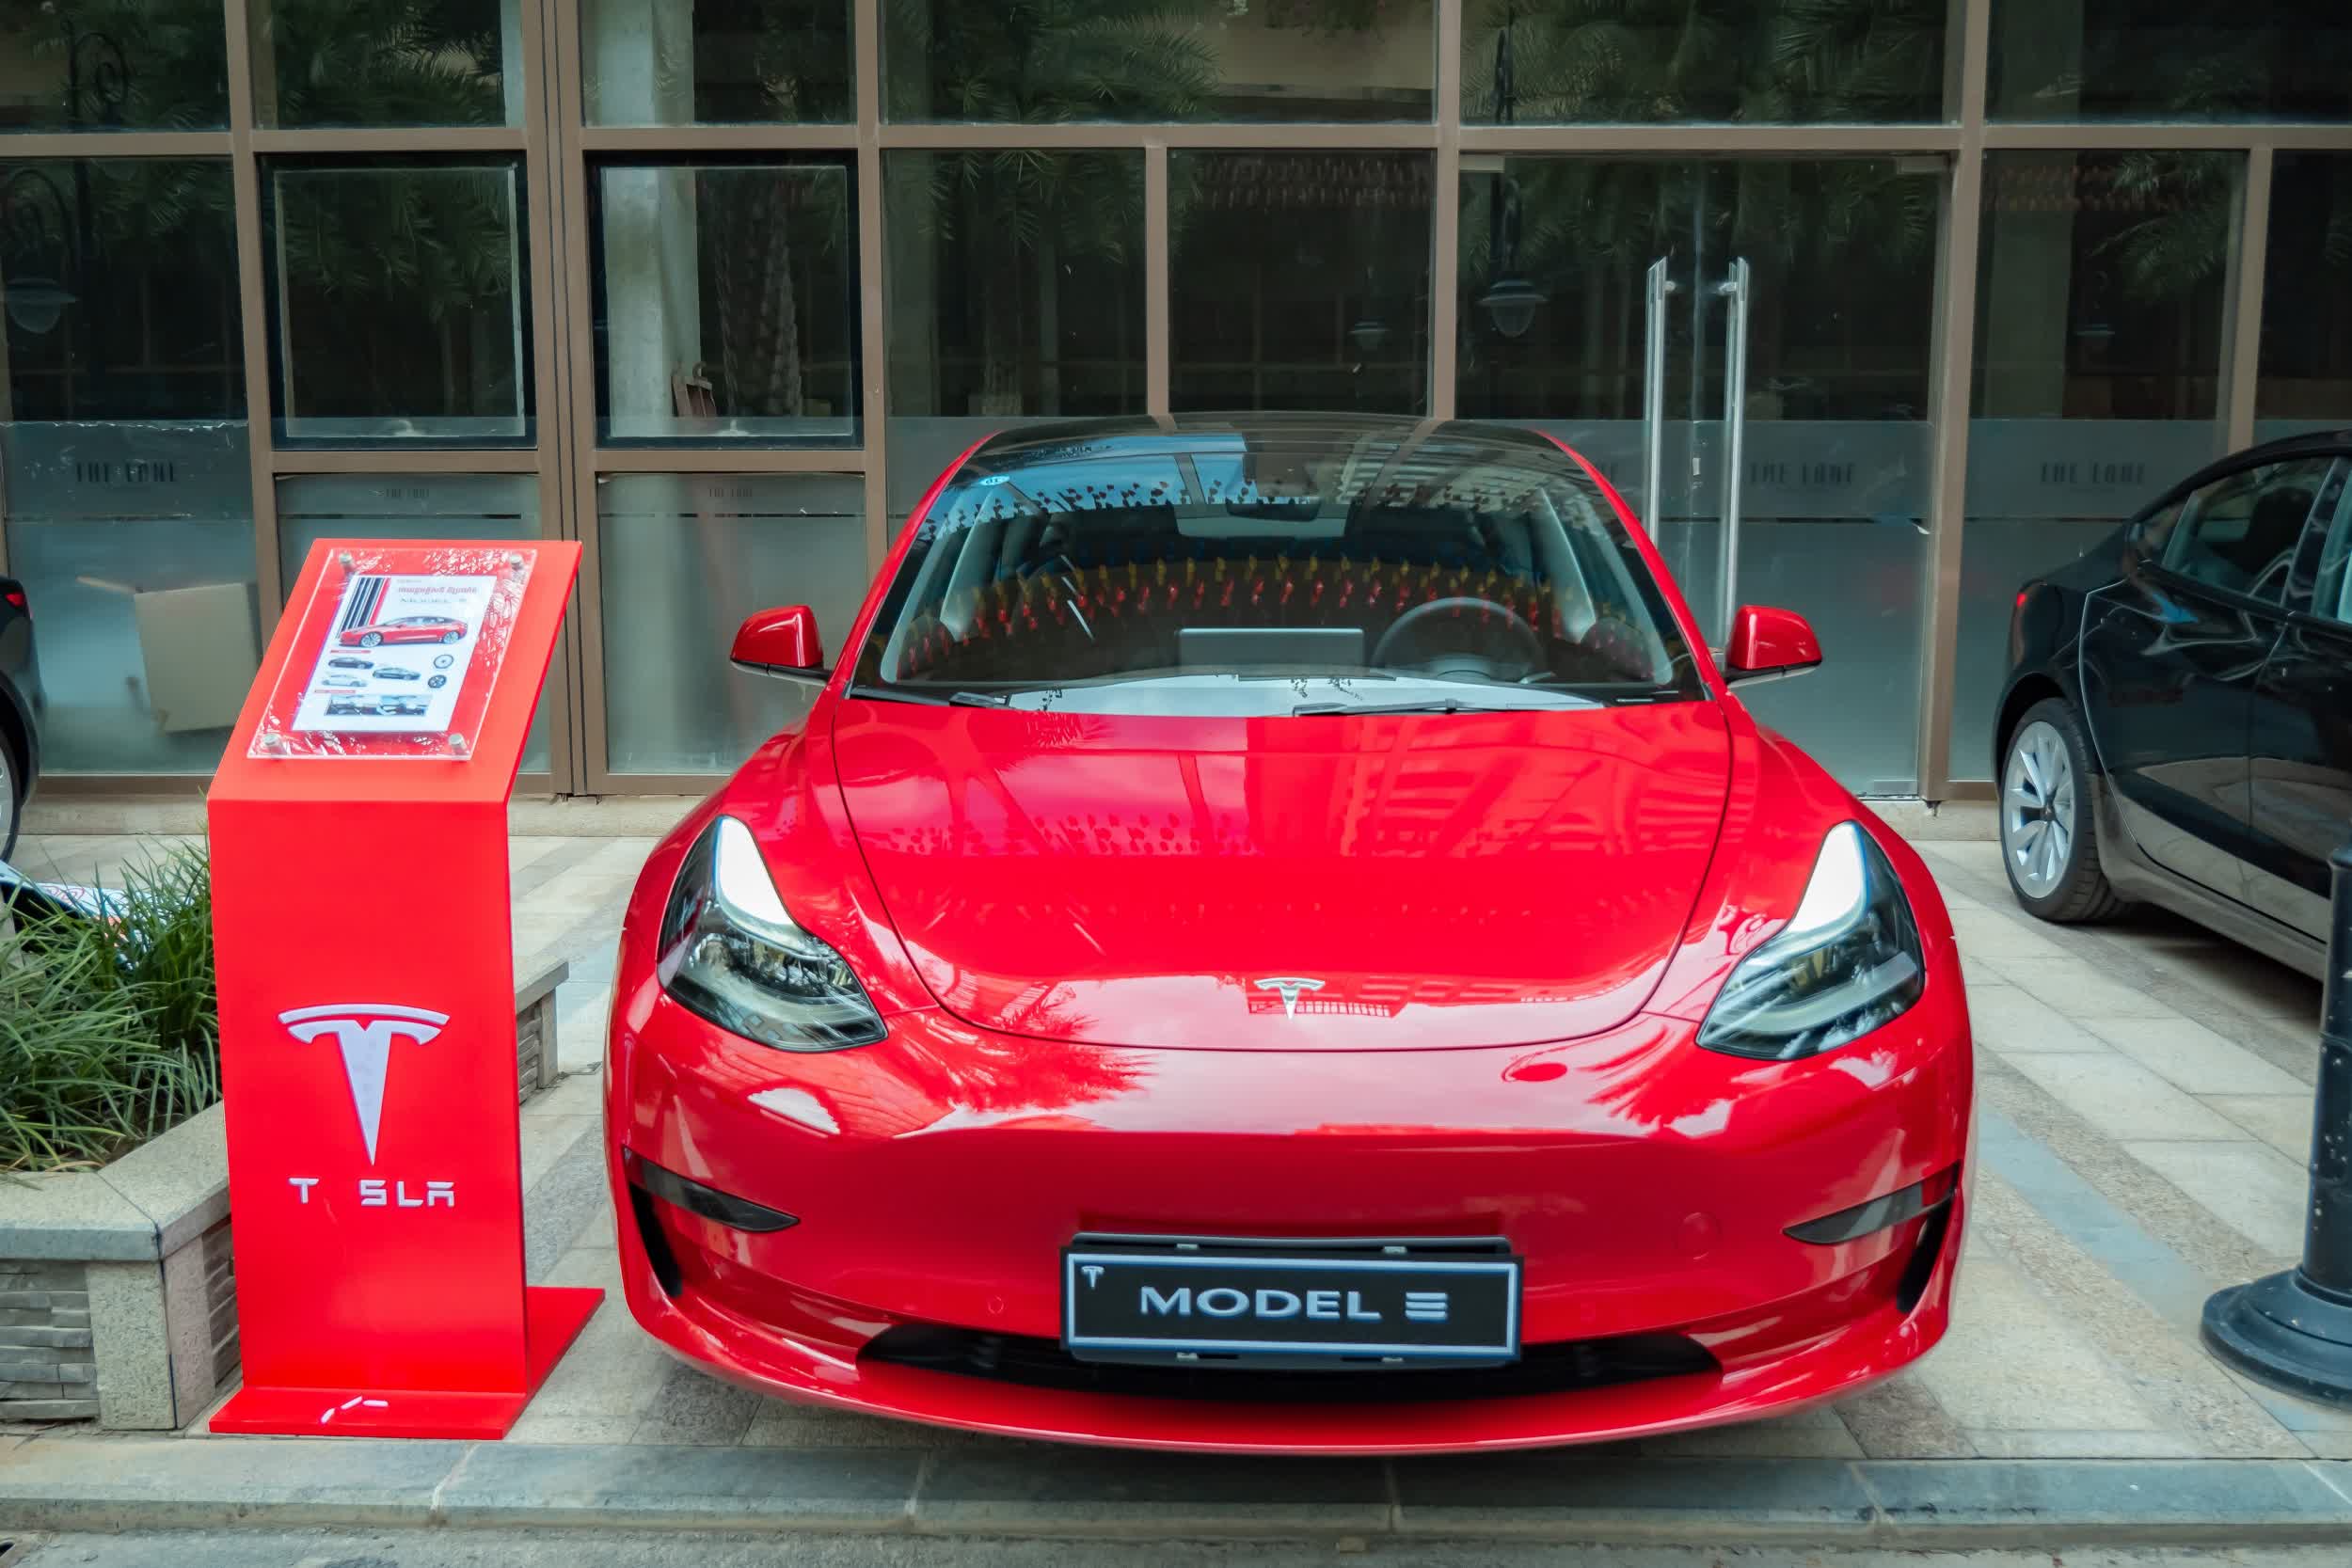 Tesla set a new record with 343,830 electric vehicles delivered in the third quarter